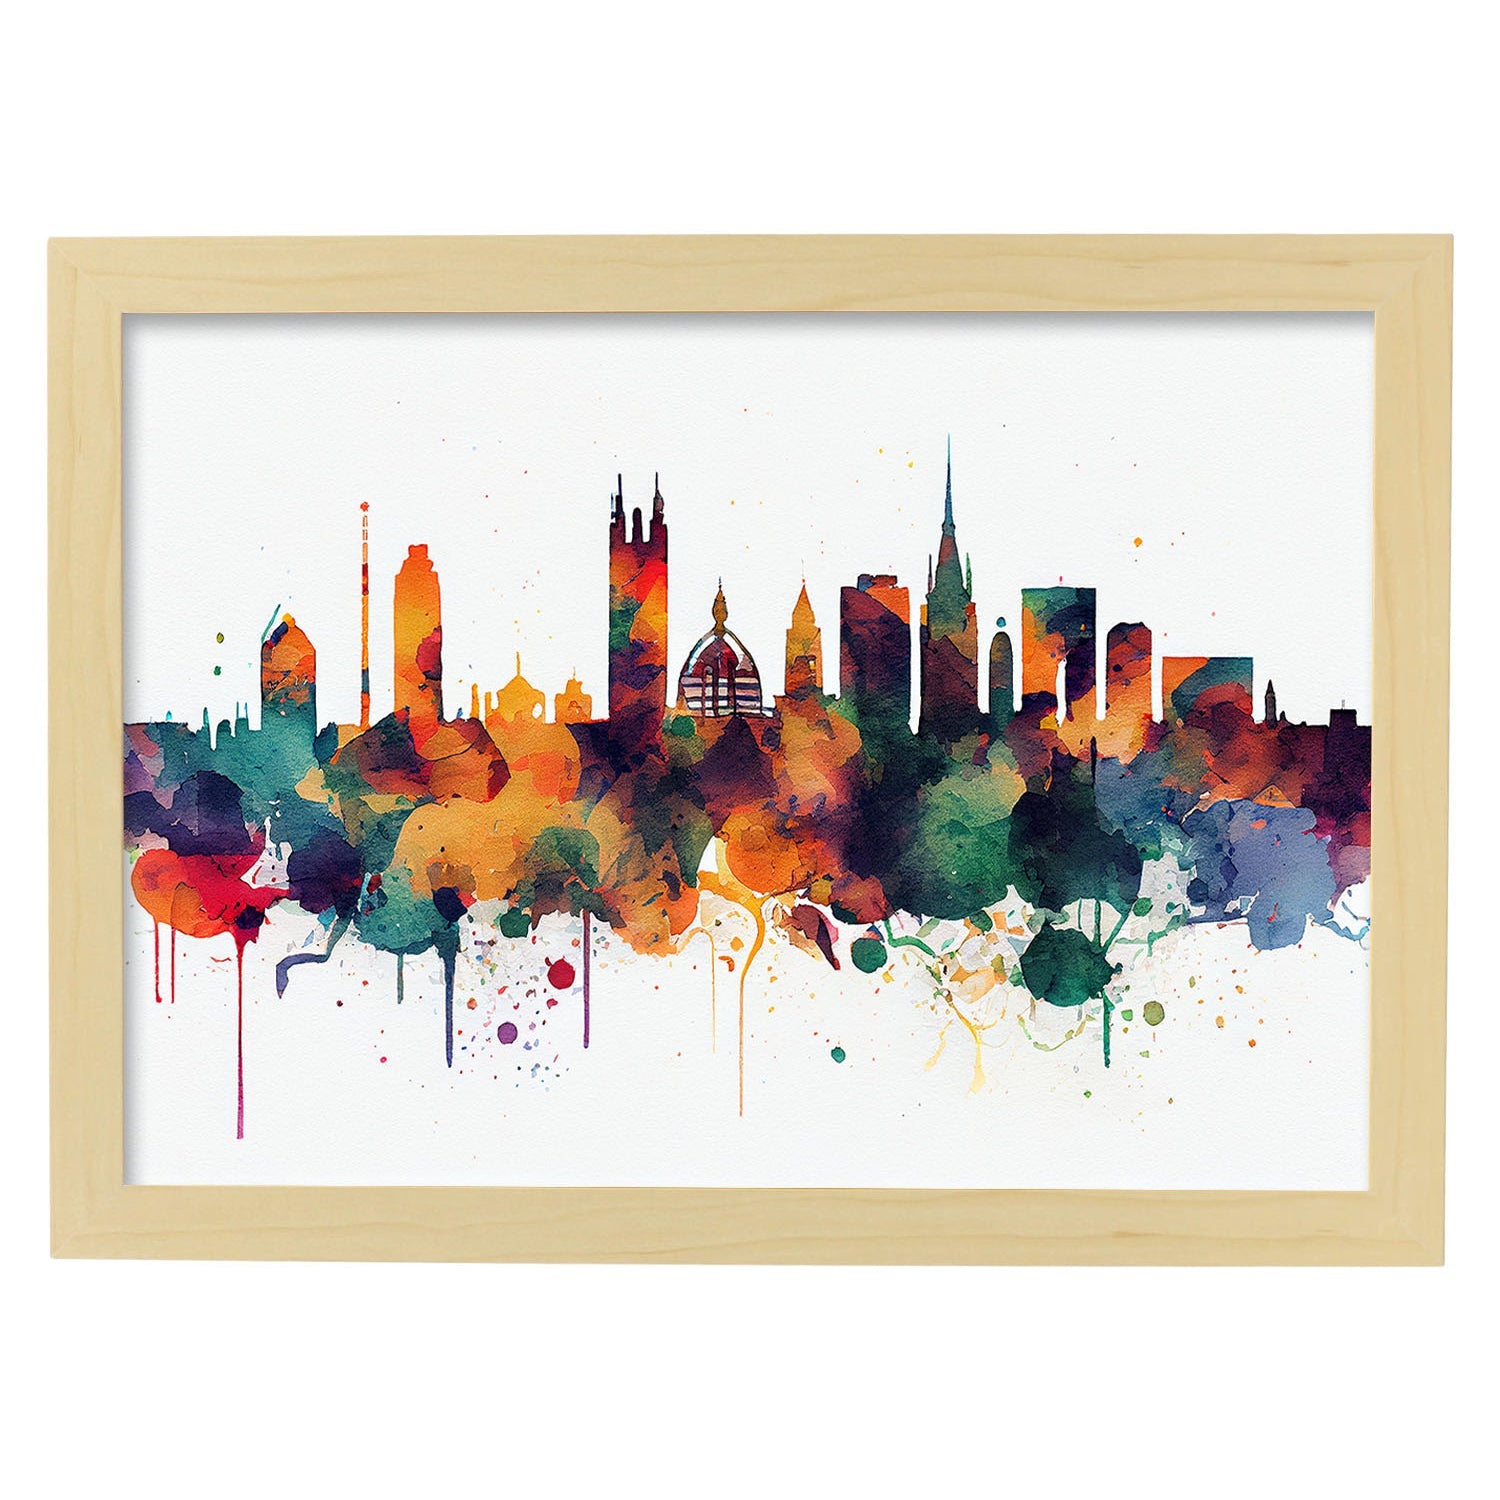 Nacnic watercolor of a skyline of the city of Manchester. Aesthetic Wall Art Prints for Bedroom or Living Room Design.-Artwork-Nacnic-A4-Marco Madera Clara-Nacnic Estudio SL